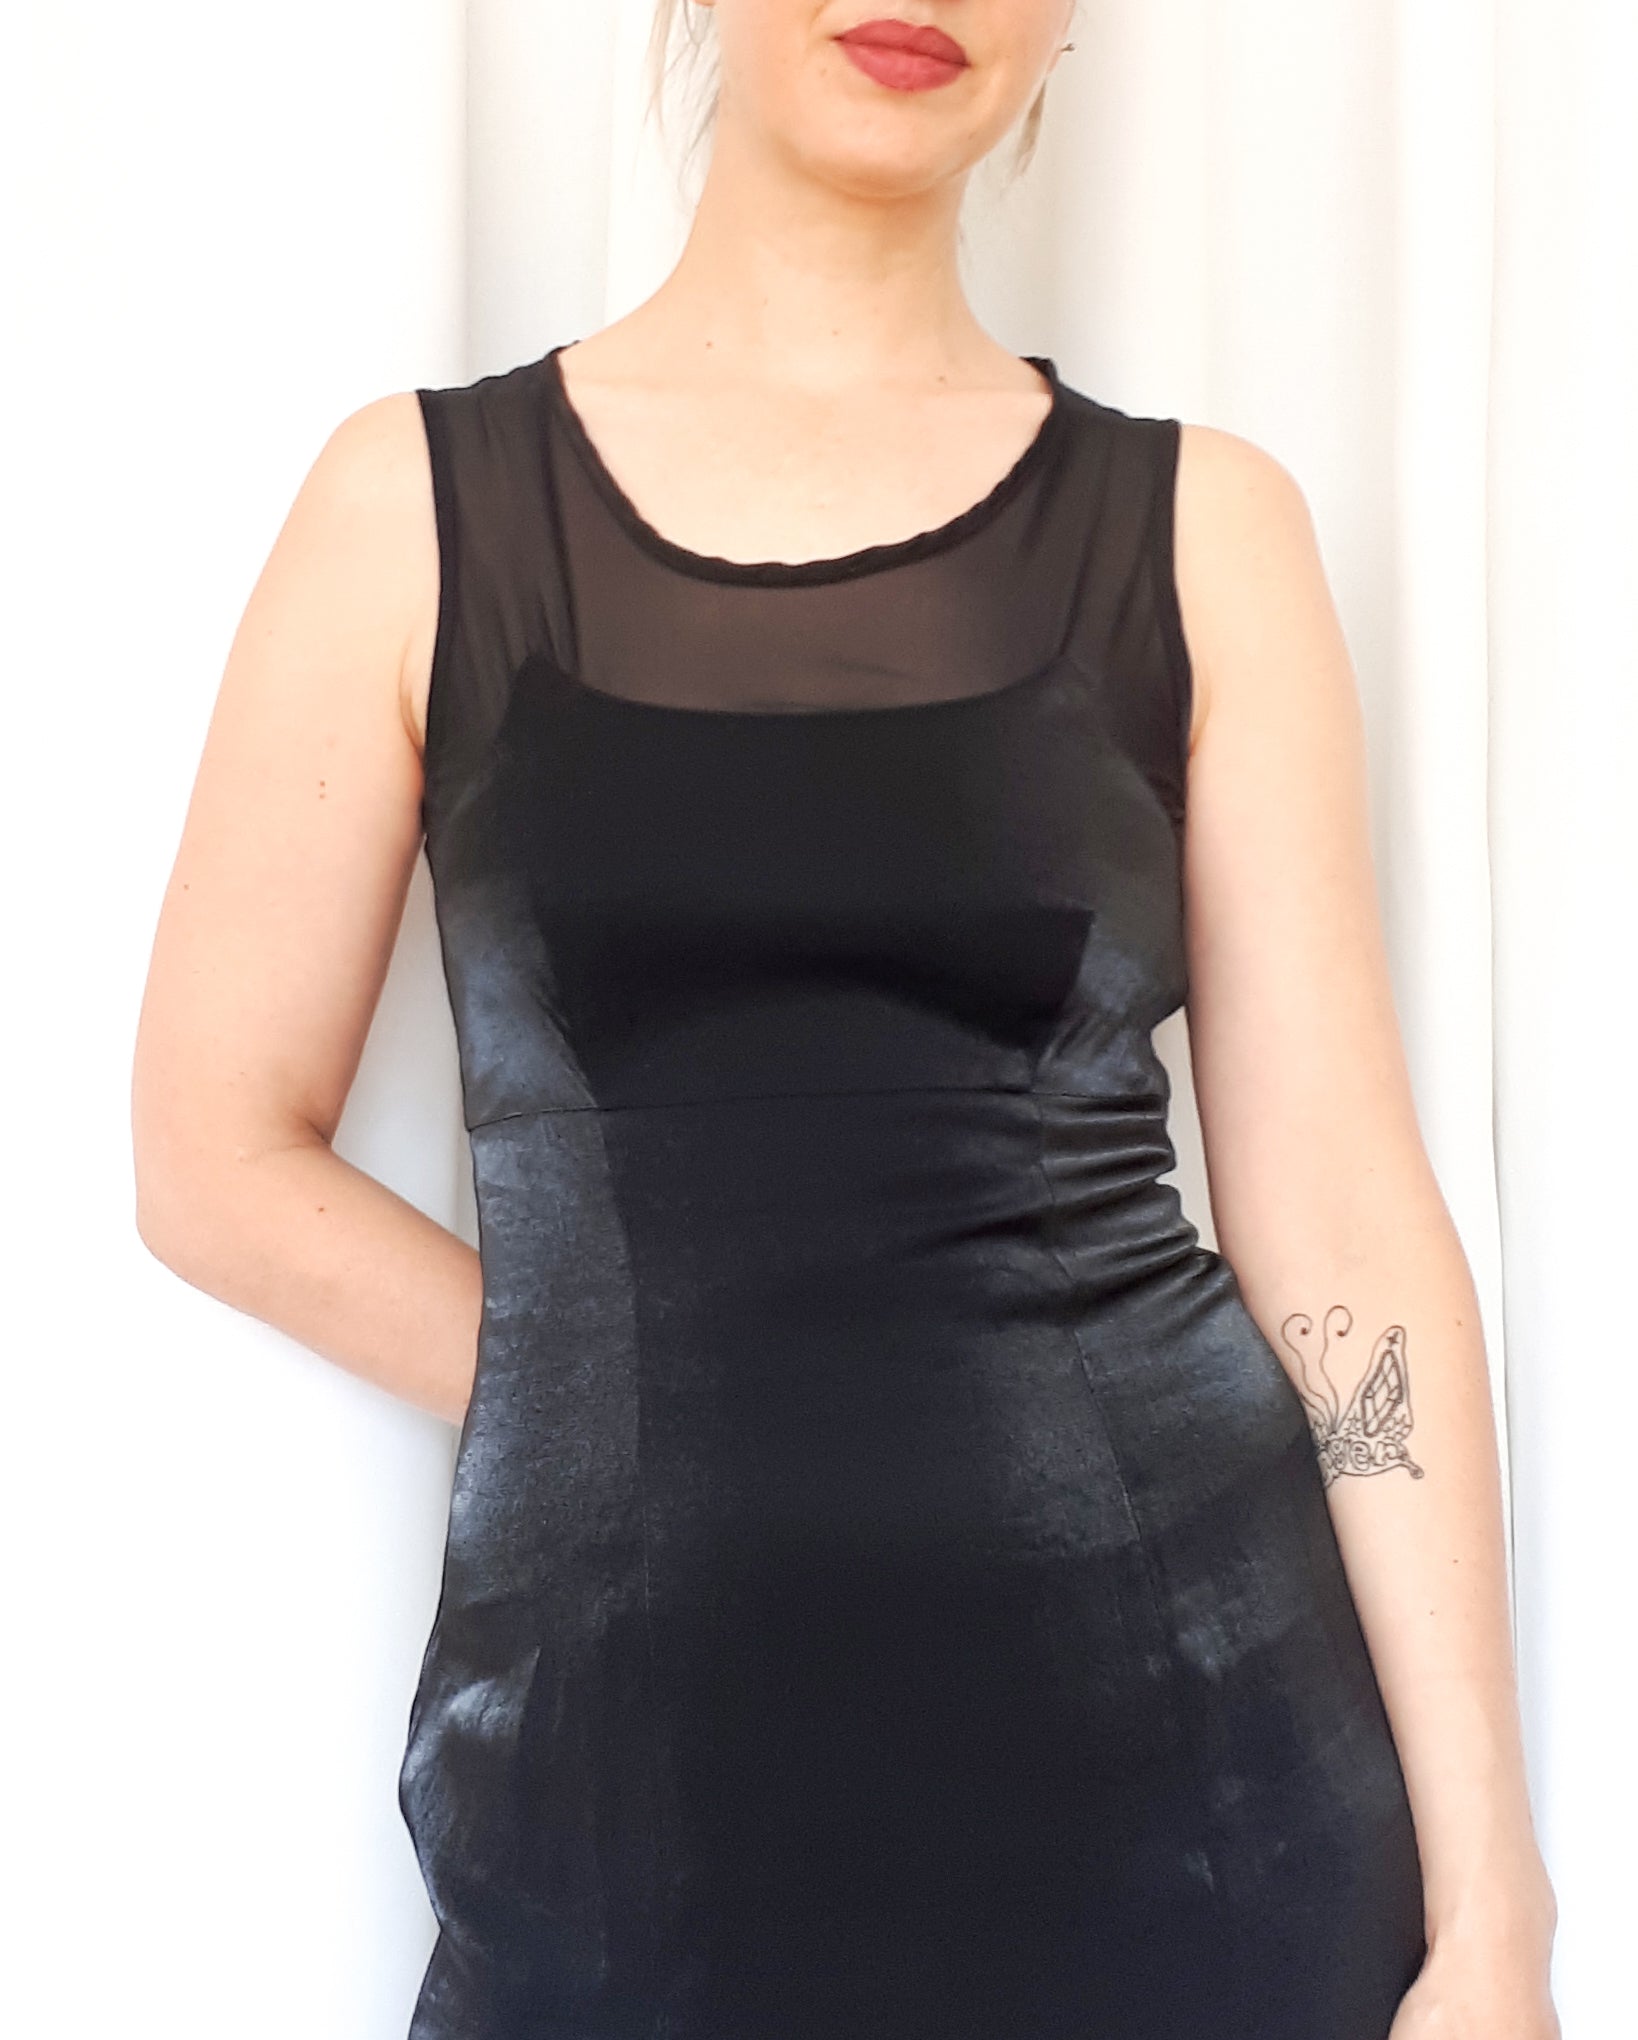 Vintage 90s Le Chateau Black Dress With A High Slit Up The Leg and Mesh Details